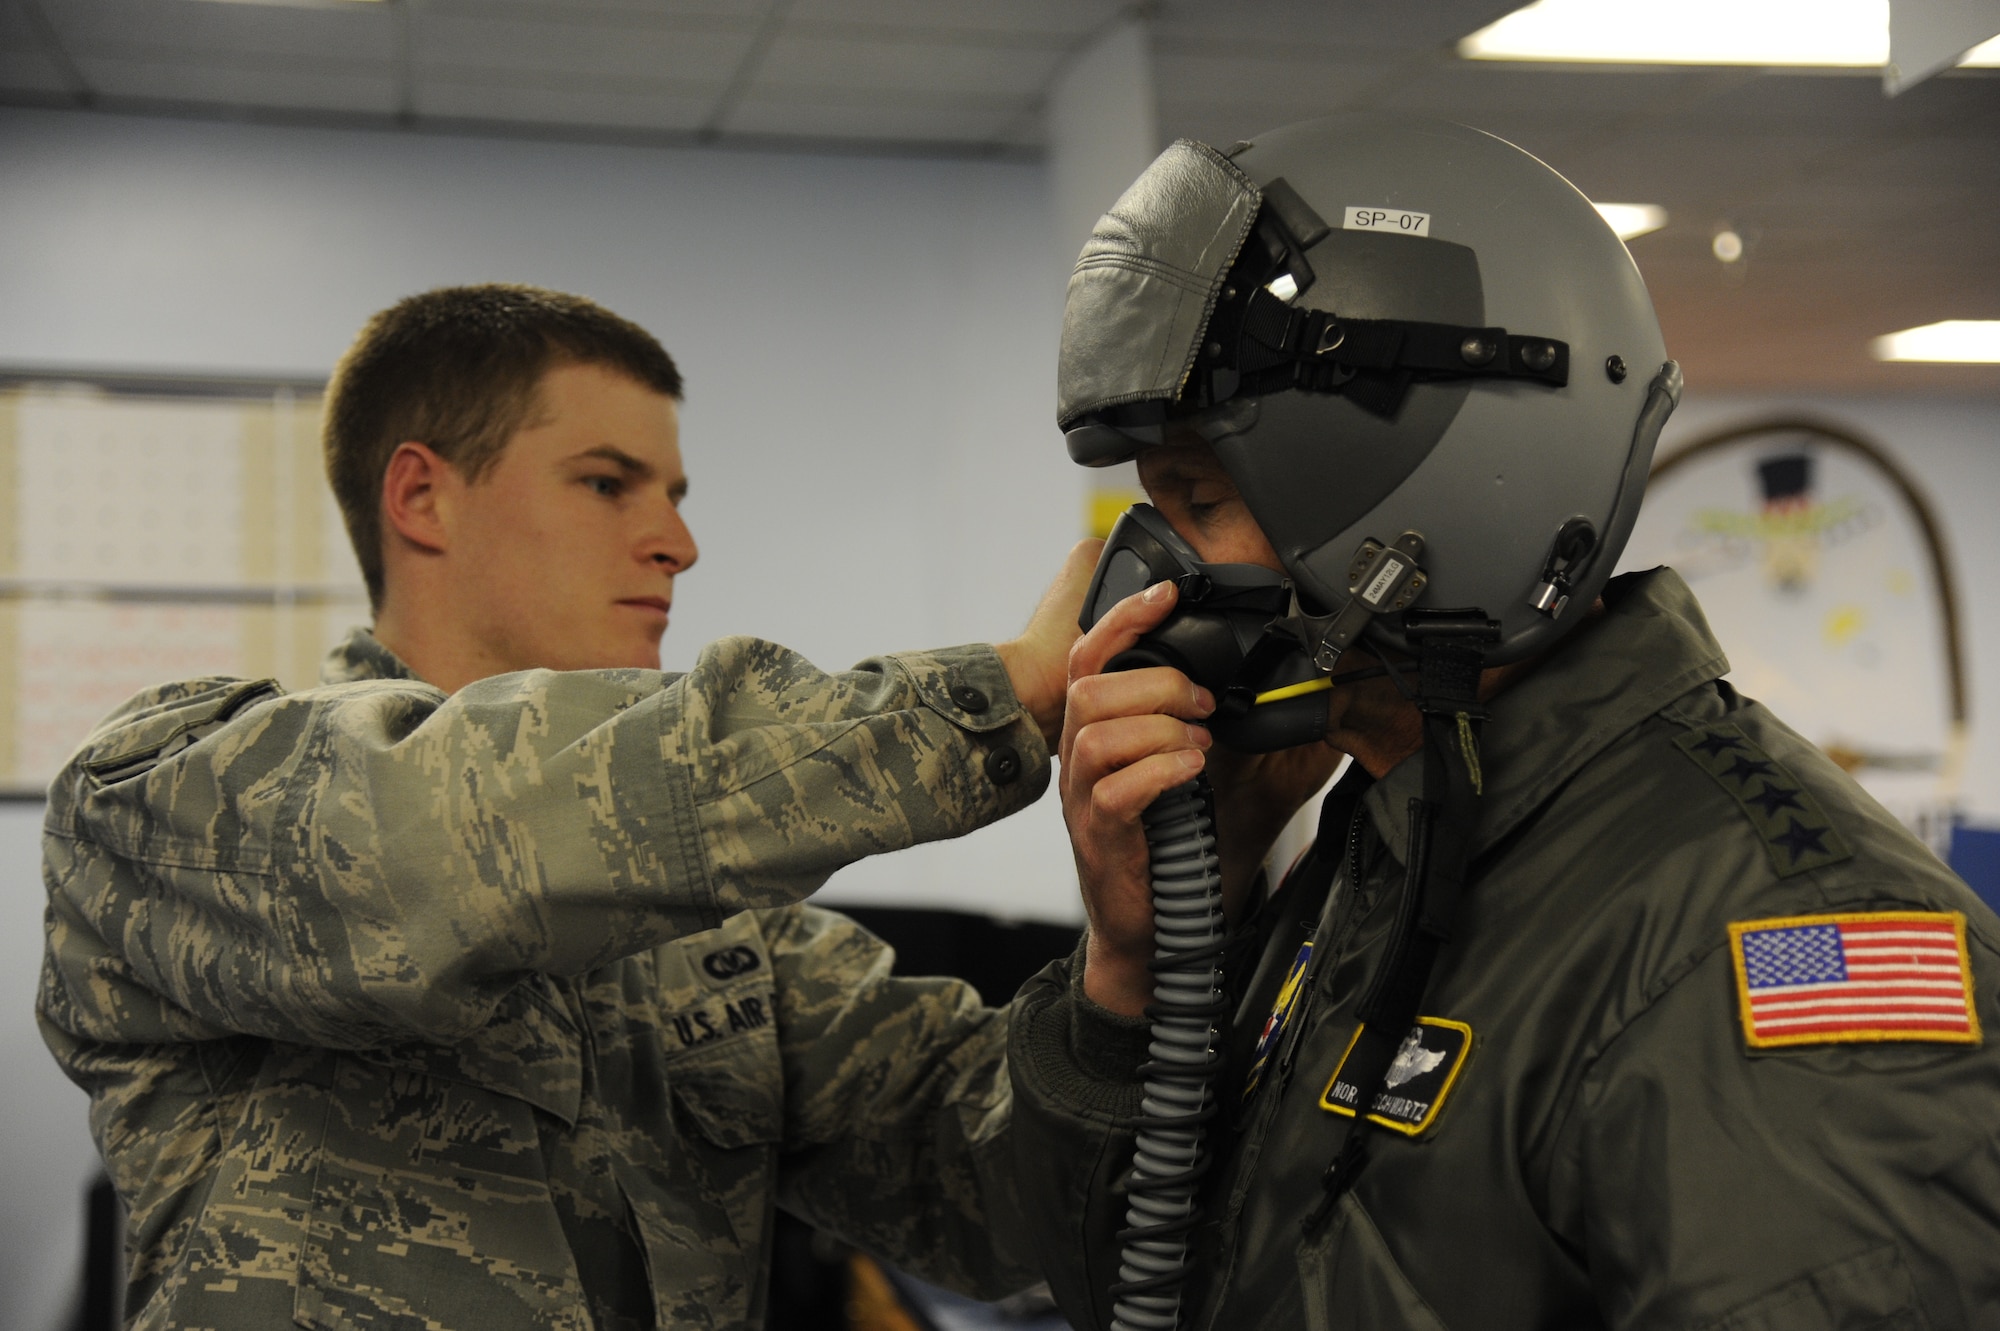 LAUGHLIN AIR FORCE BASE, Texas—Airman Jacob Pearce, 47th Operations Support Squadron, conducts a helmet fitting on Air Force Chief of Staff Gen. Norton Schwartz in preparation for a T-6 Texan II sortie here March 9. Schwartz was a keynote speaker at the graduation of Specialized Undergraduate Pilot Training Class 12-06, where 23 new pilots were awarded silver wings. (U.S. Air Force photo/Airman 1st Class Nathan L. Maysonet) 